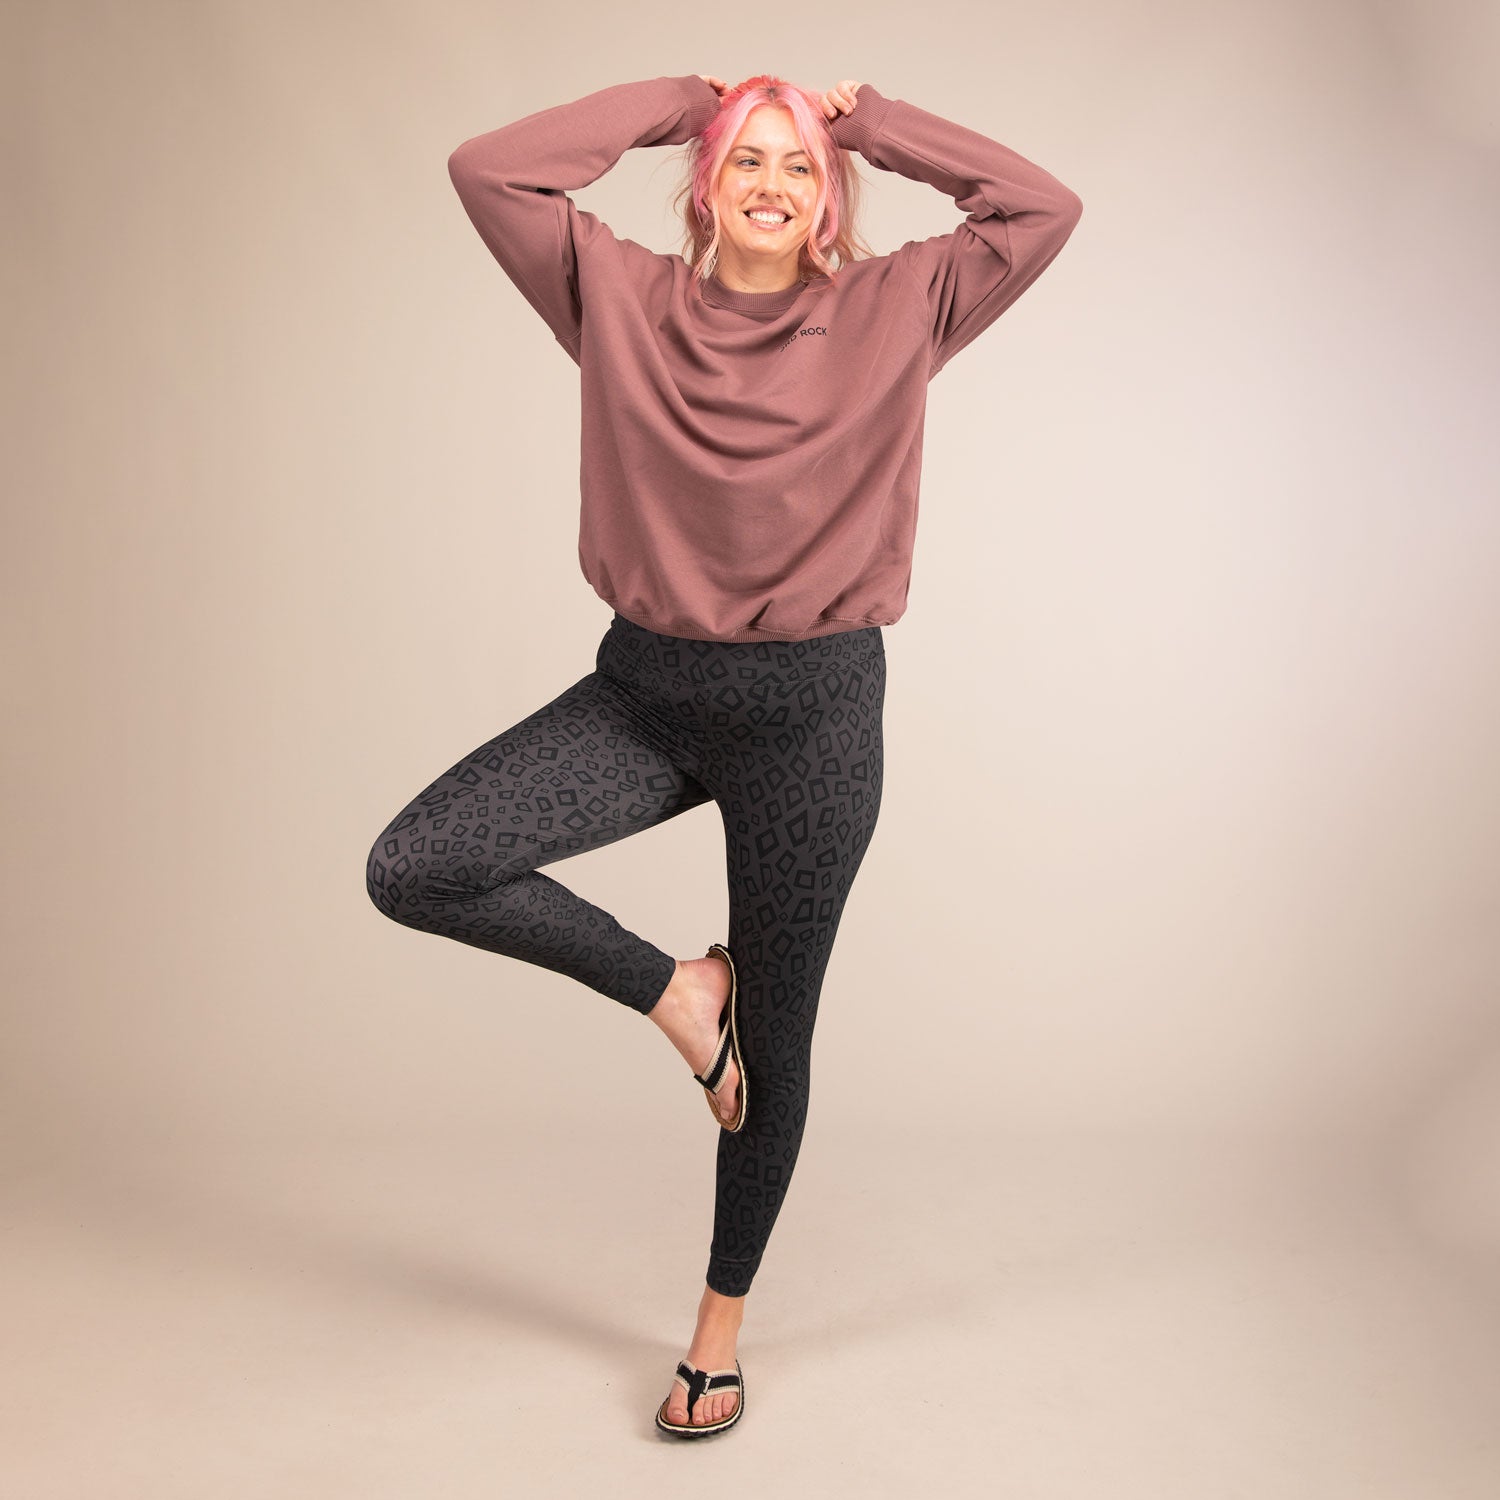 TITAN MINIMAL LEOPARD | Printed Recycled Leggings | 3RD ROCK Clothing -  Sophie is 5ft 9 with a 34" waist, 42" hips and wears a size 16 F